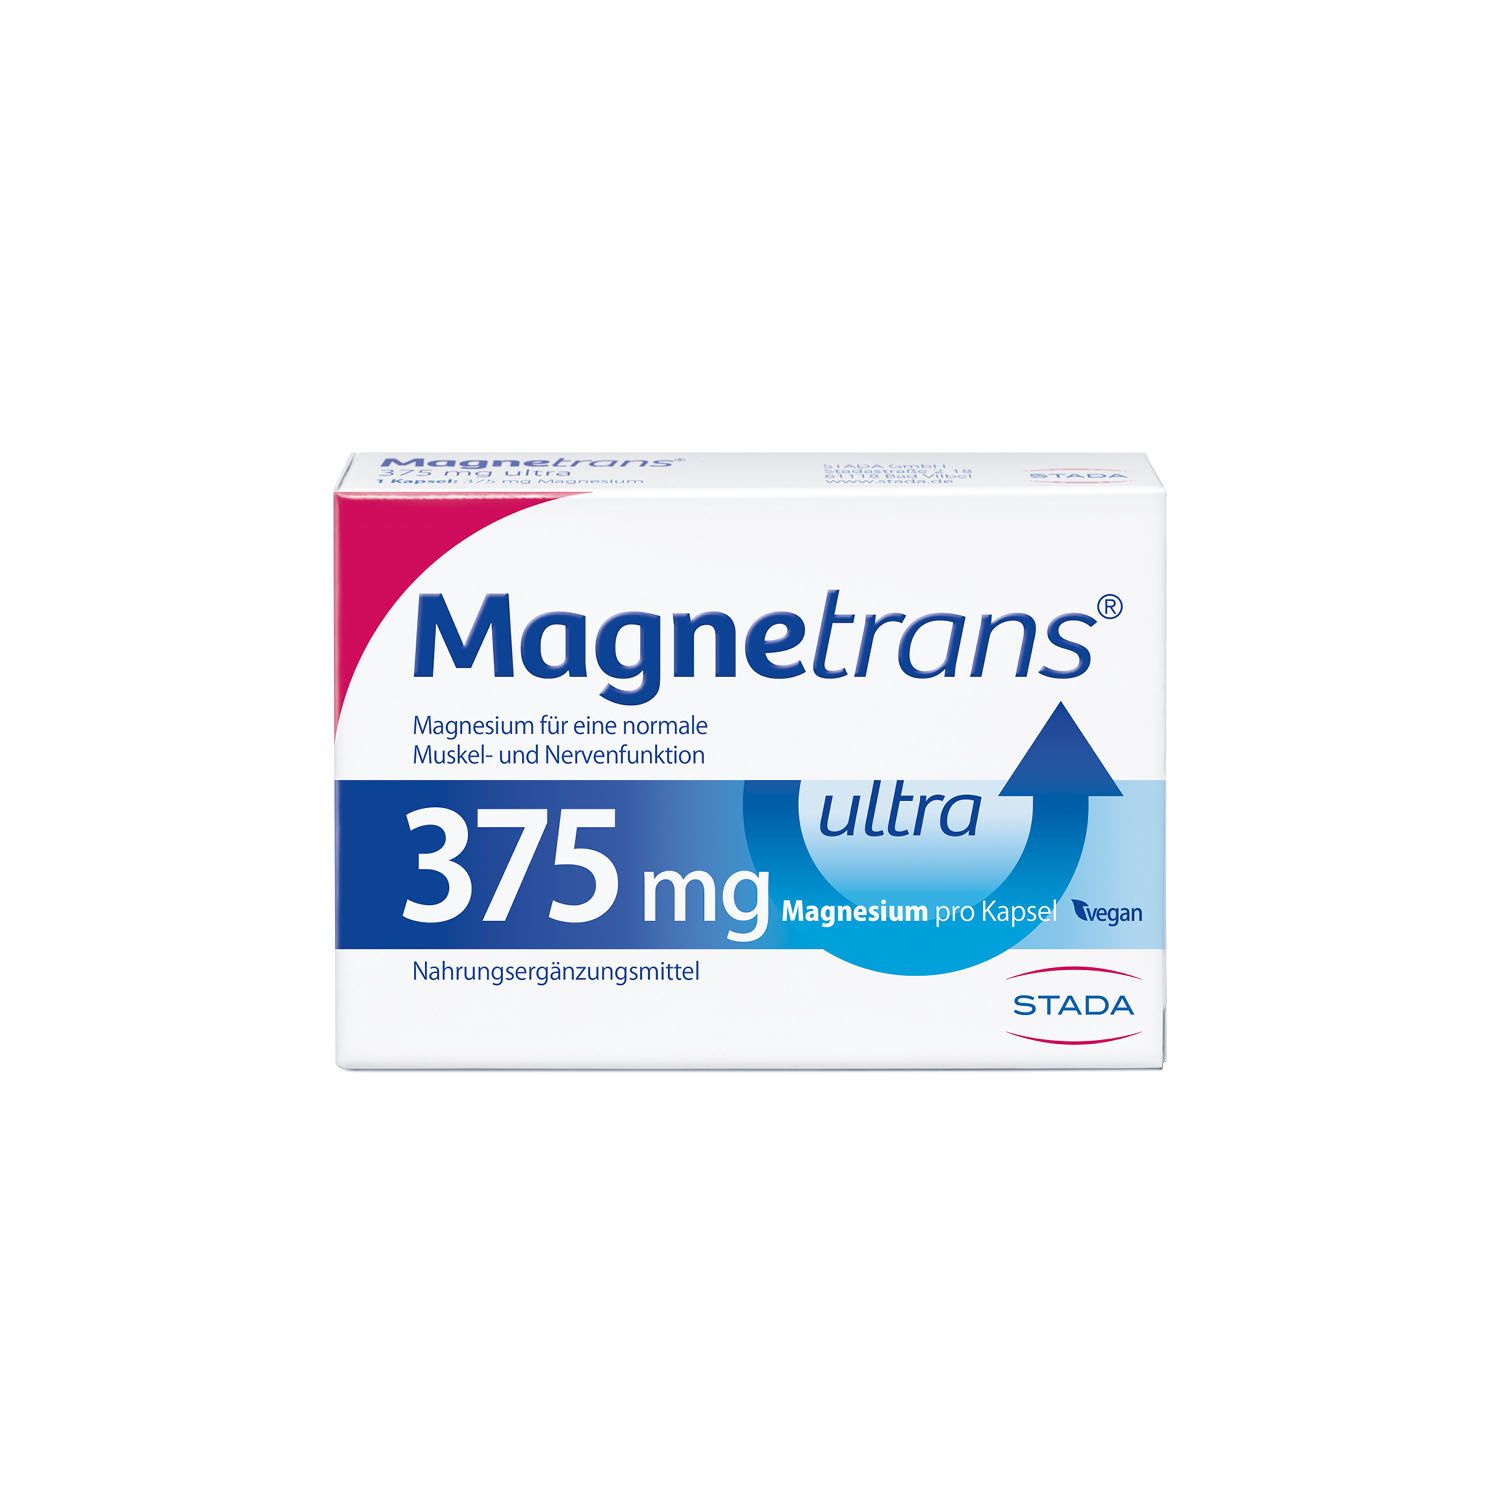 Image of Magnetrans® 375 mg ultra